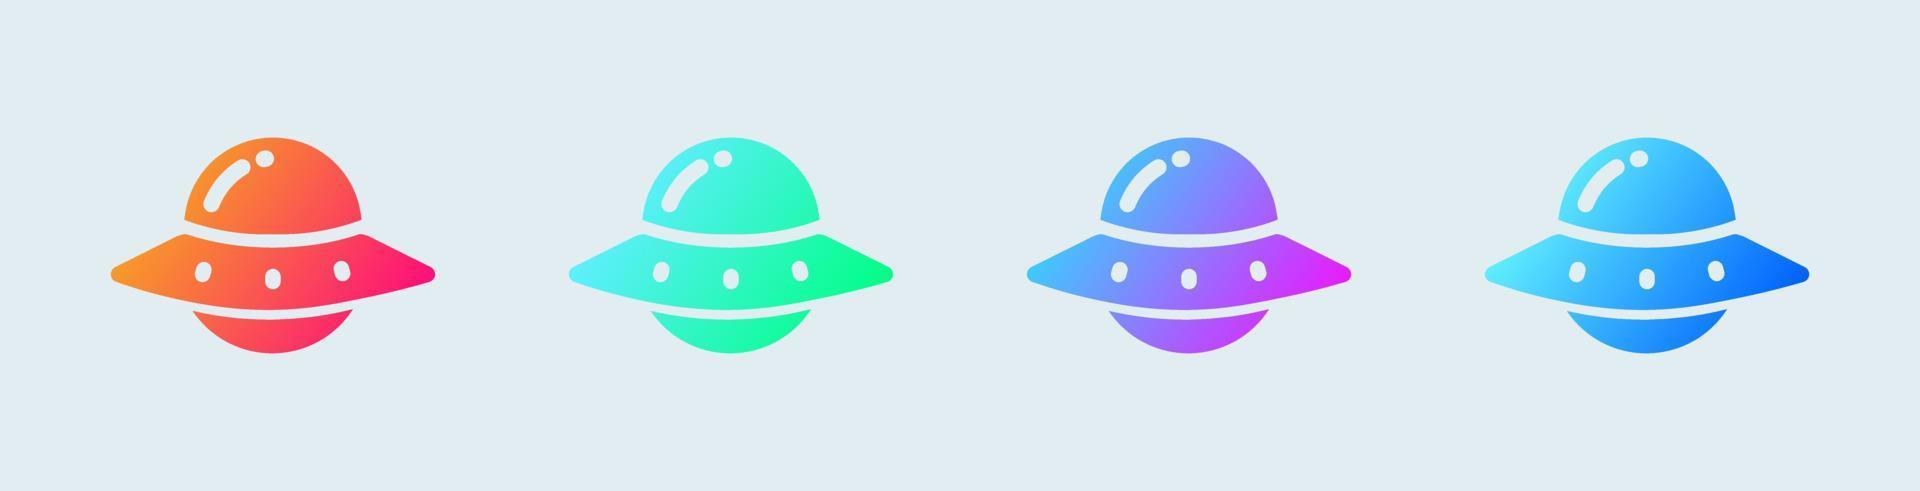 Ufo solid icon in gradient colors. Alien space ship signs vector illustration.